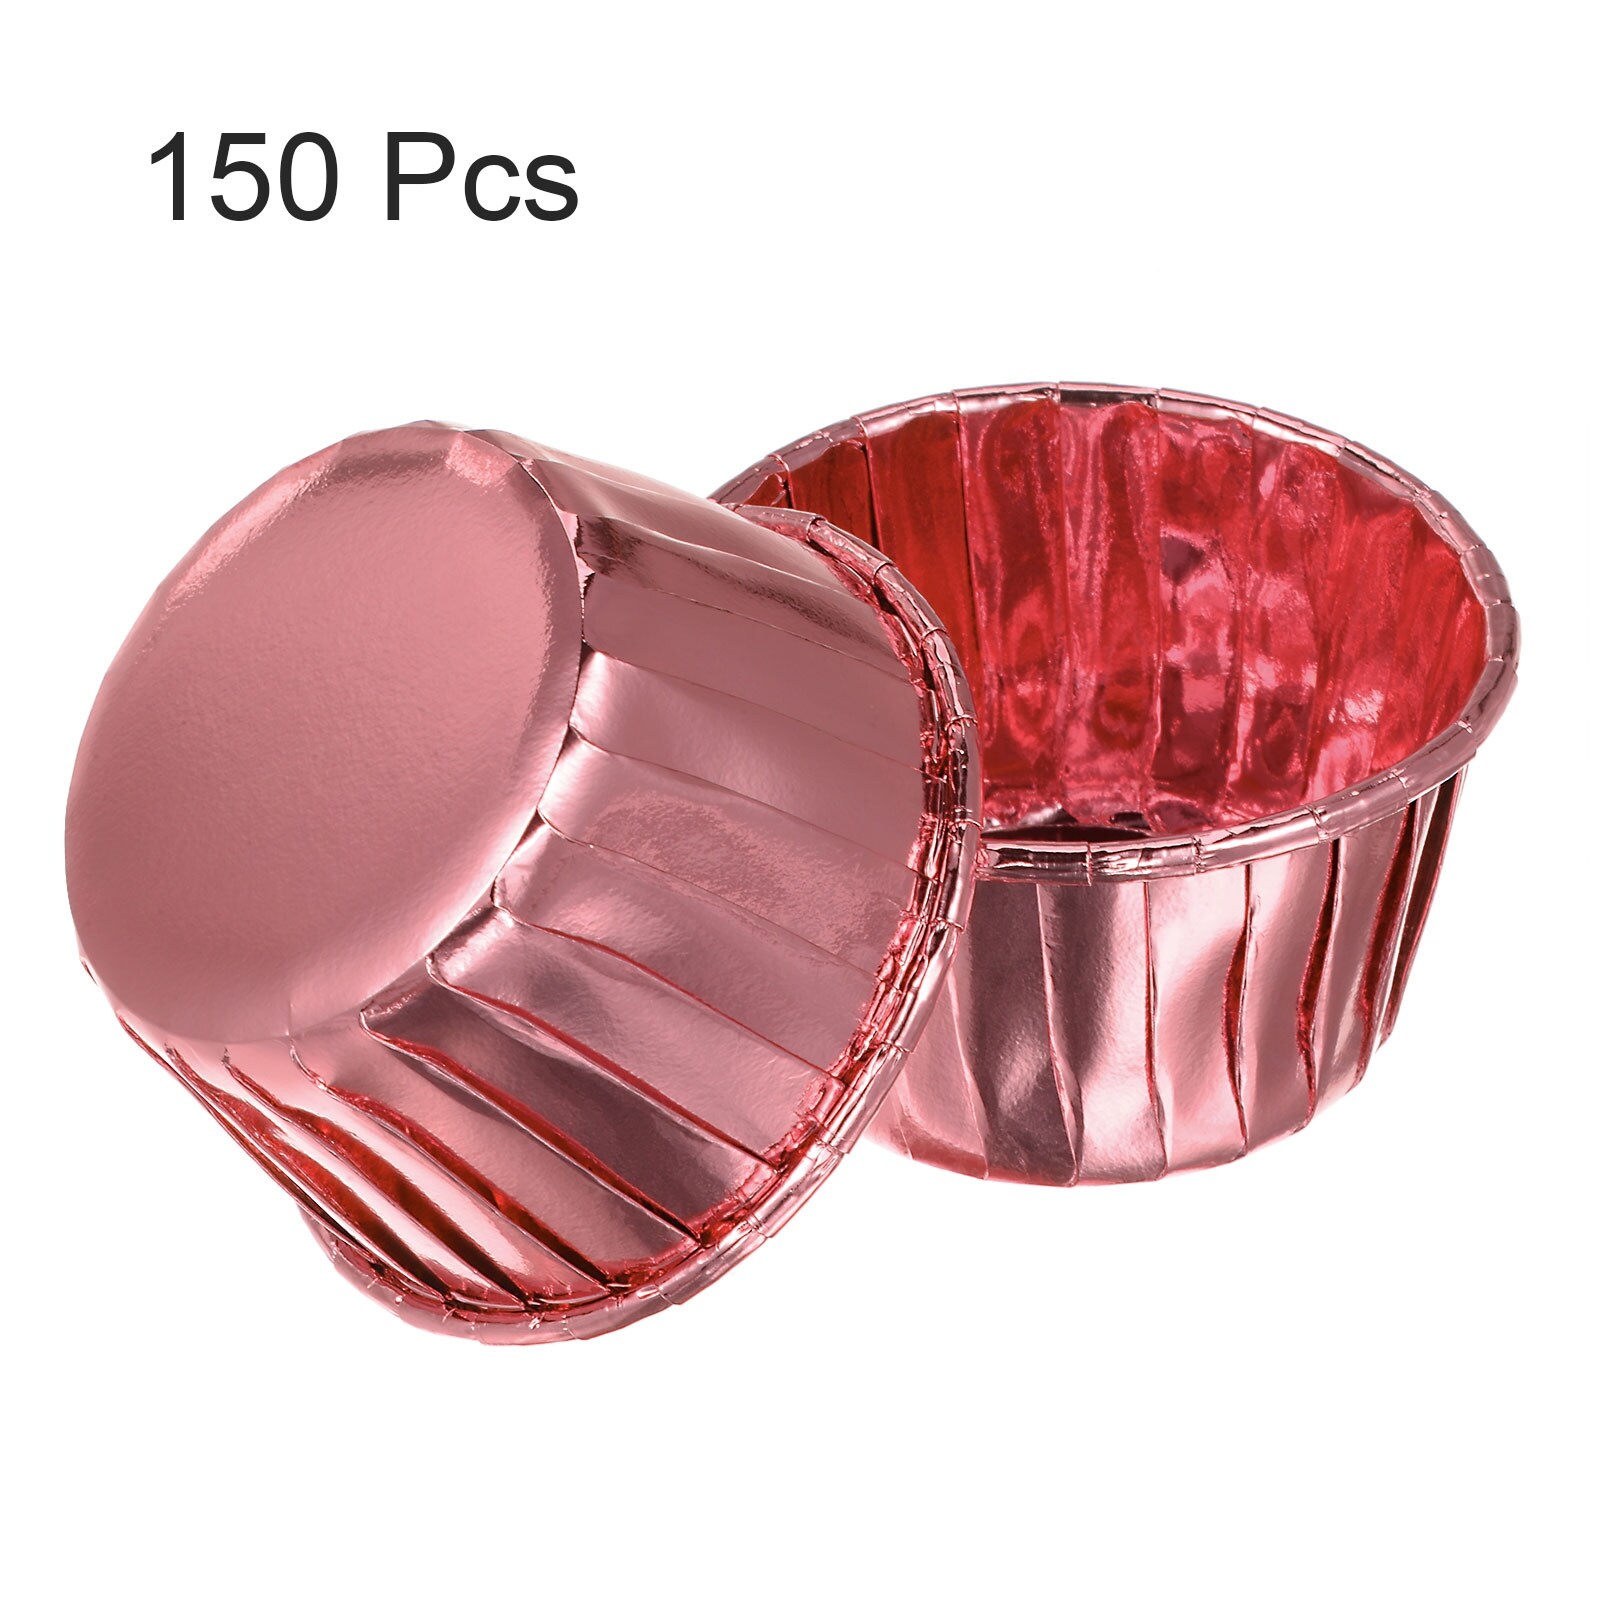 https://ak1.ostkcdn.com/images/products/is/images/direct/7b1c8537046e9e847d6354461c015c3ed94c4dbb/Cupcake-Cups%2C-150pcs-Aluminum-Foil-Standard-Cupcake-Liners.jpg